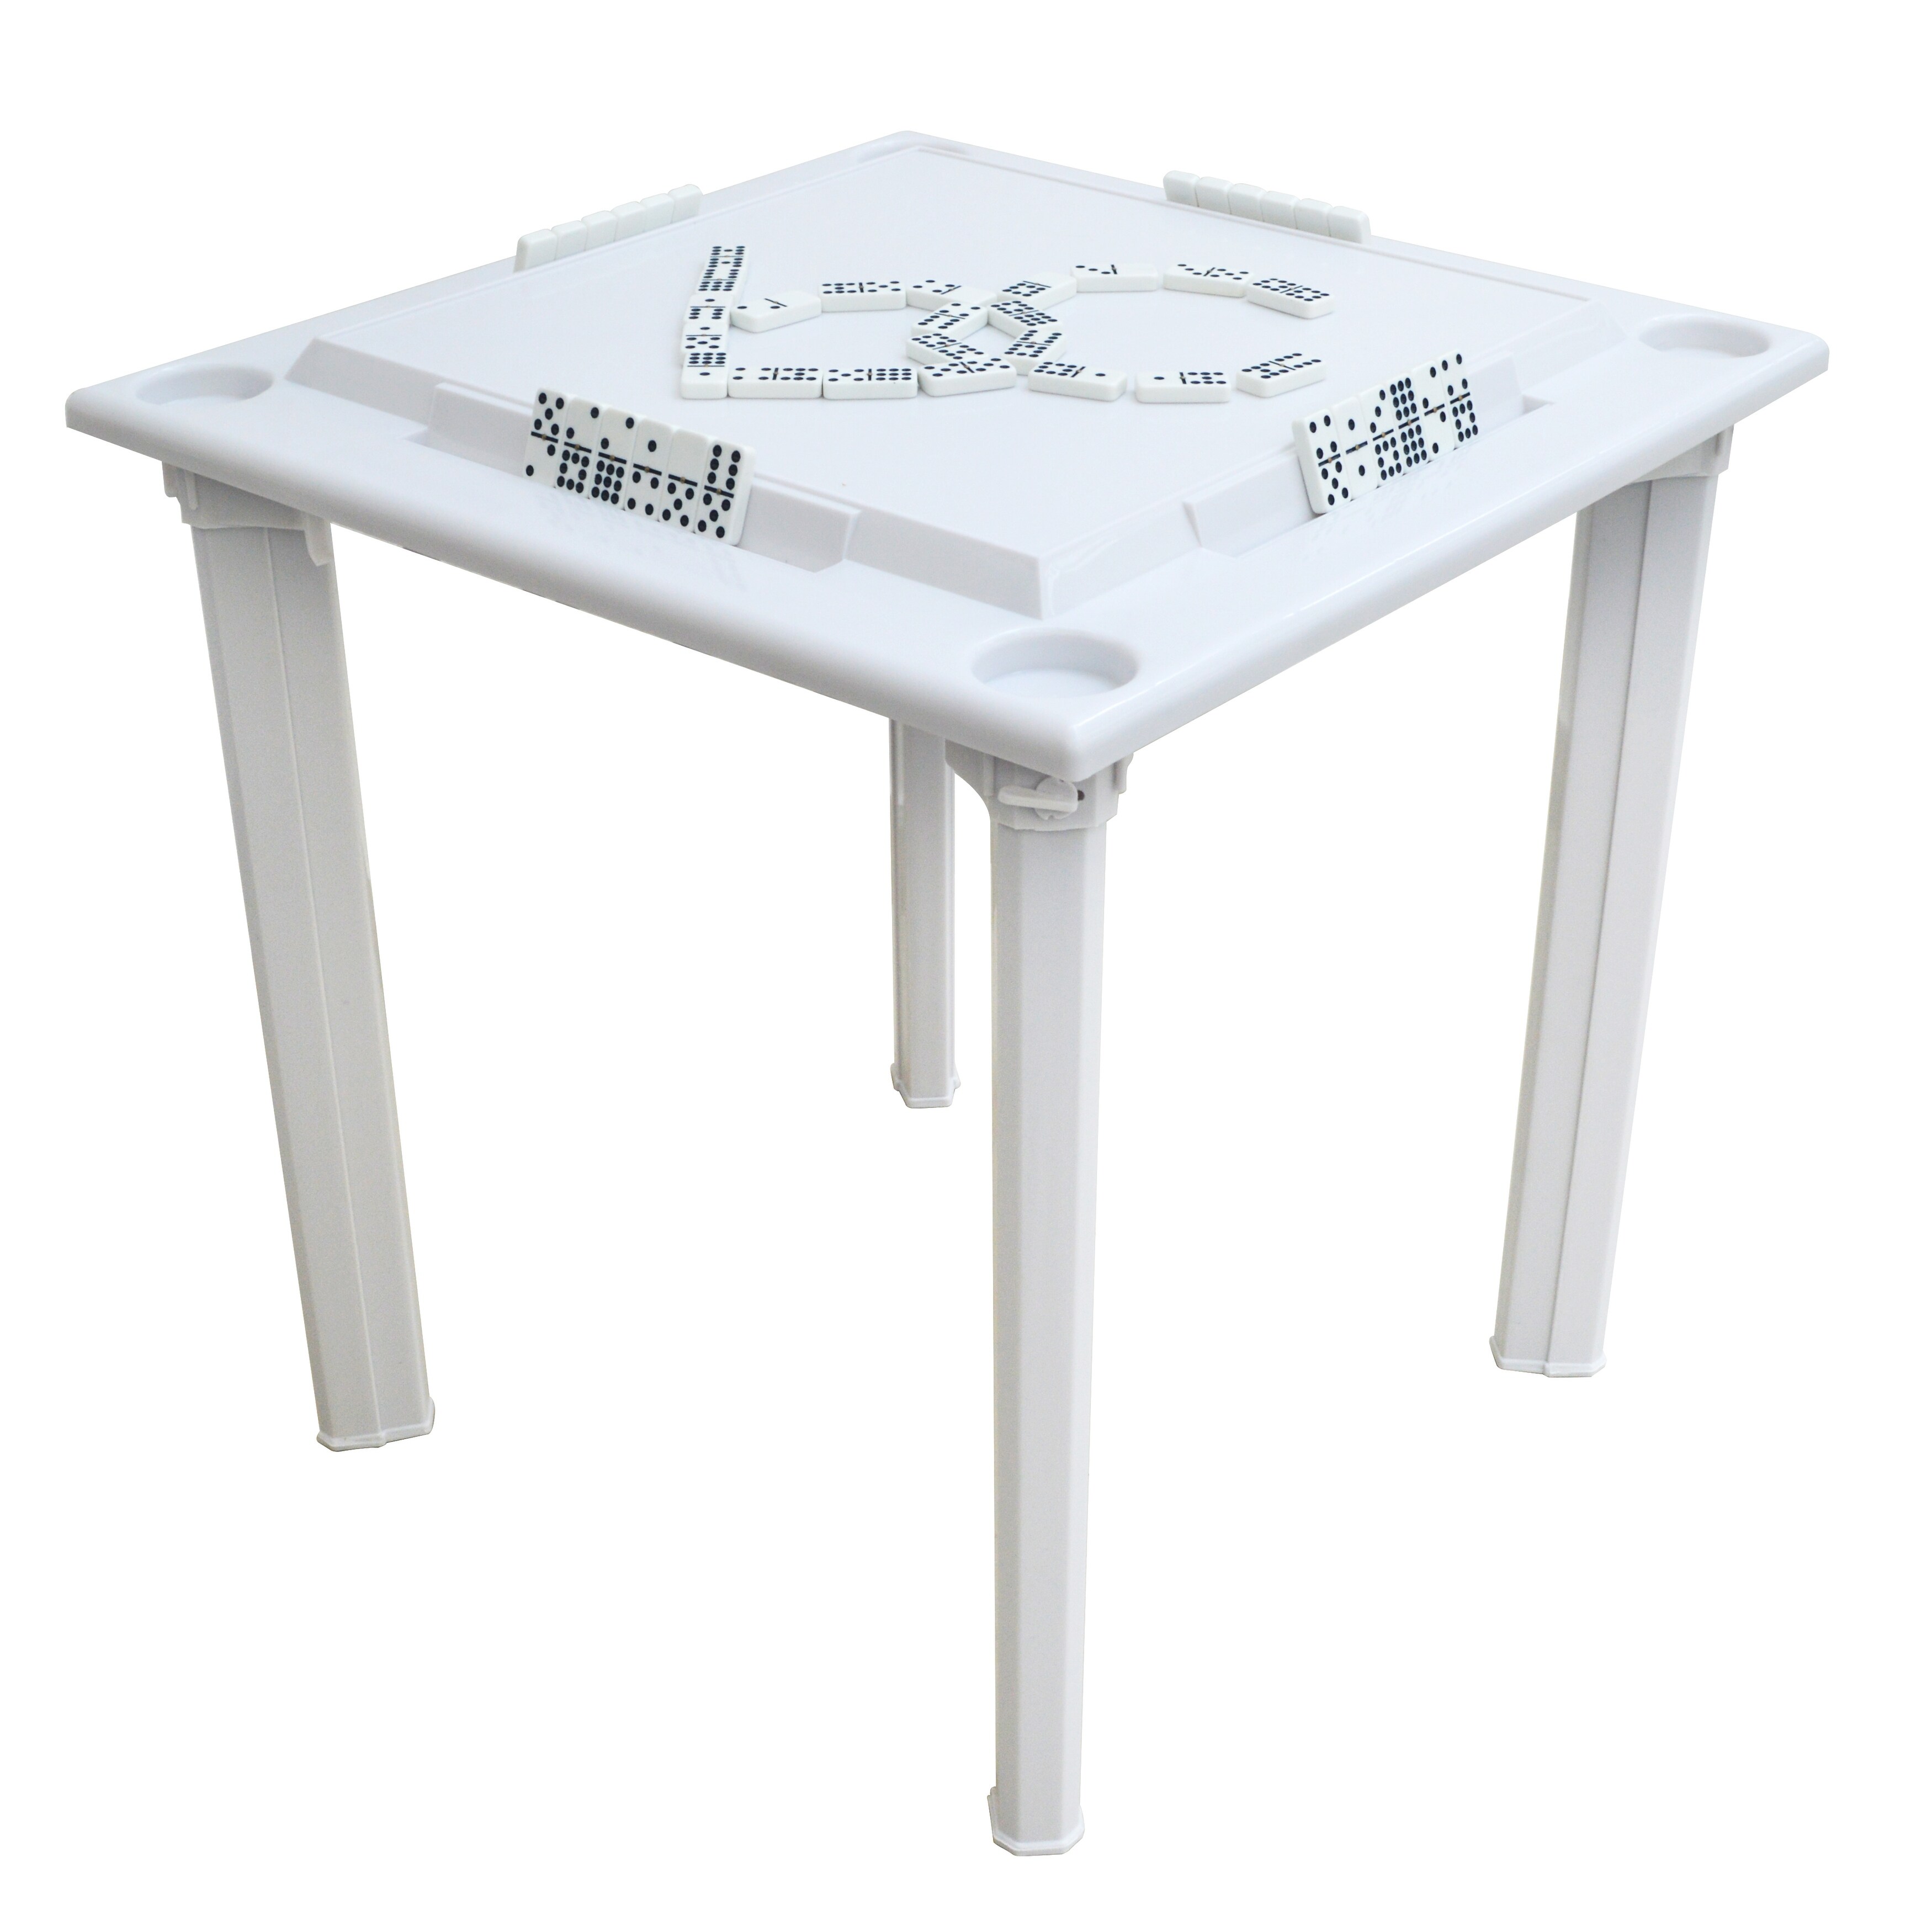 https://ak1.ostkcdn.com/images/products/is/images/direct/8b97f4219b9790020c6300bab38c3a7443487357/Bene-Casa-waterproof-plastic-game-table-with-drinks-holder%2C-built-in-tile-rack%2C-removable-leg-game-table.jpg